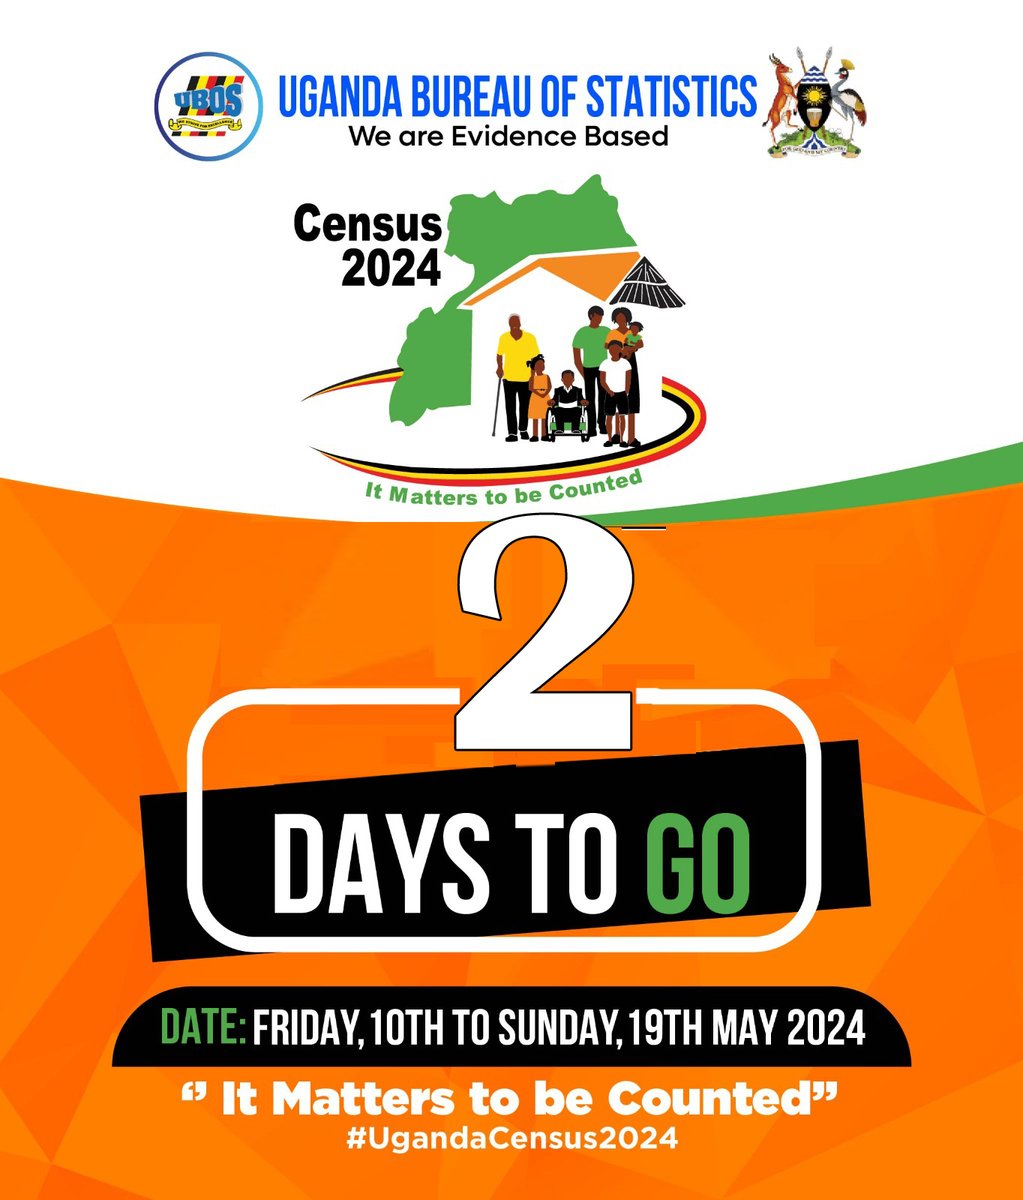 It's a new day, just 48 hours before the significant day. We would like to remind you to participate in the upcoming census 2024. Prepare to be counted on 10th May, which is this Friday. #UgandaCensus2024